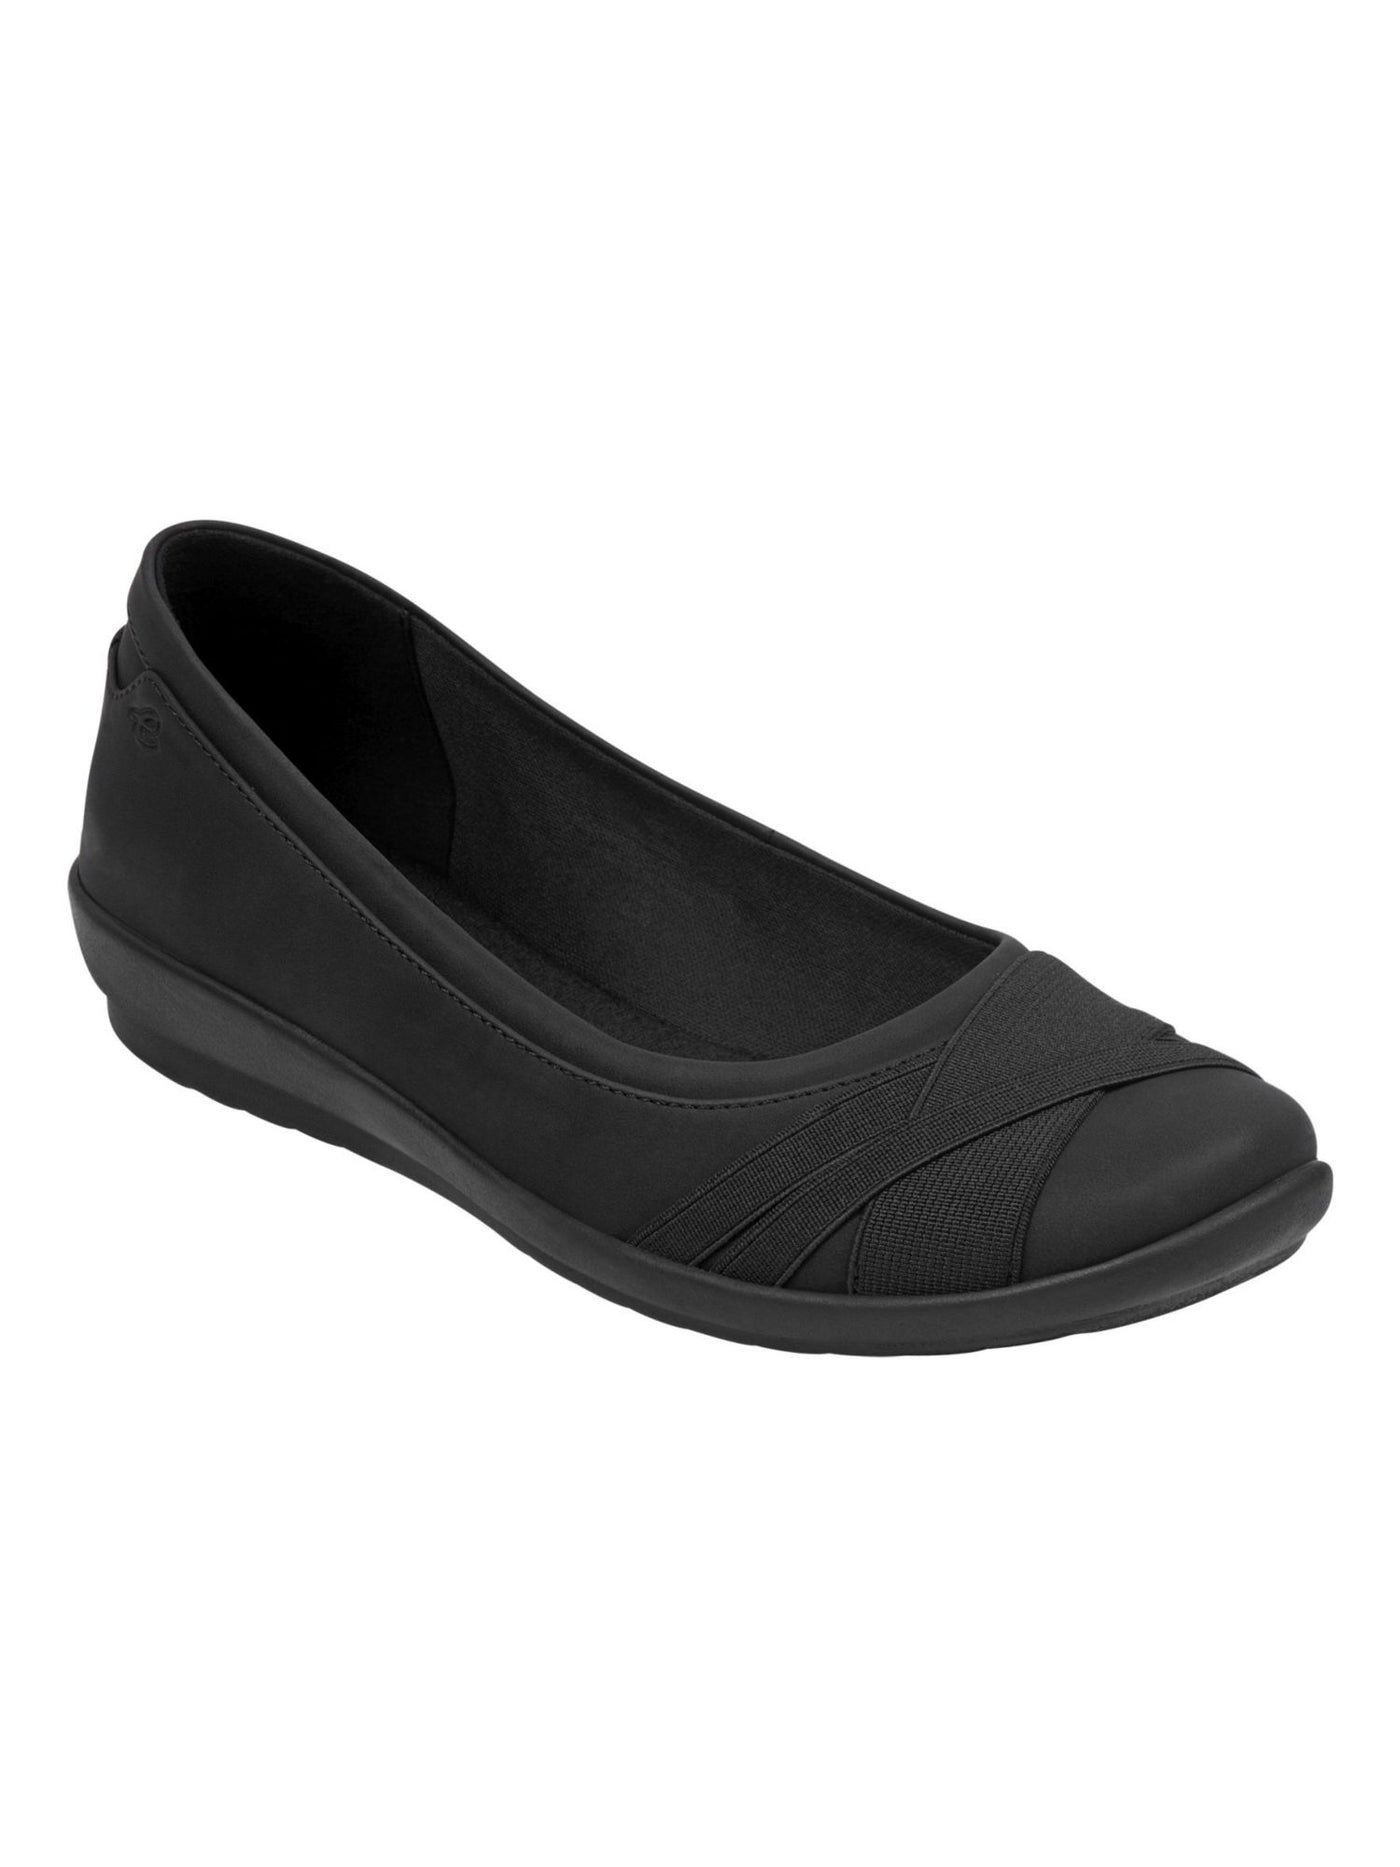 EASY SPIRIT Womens Black Arch Support Cushioned Acasia 3 Round Toe Wedge Slip On Ballet Flats 8.5